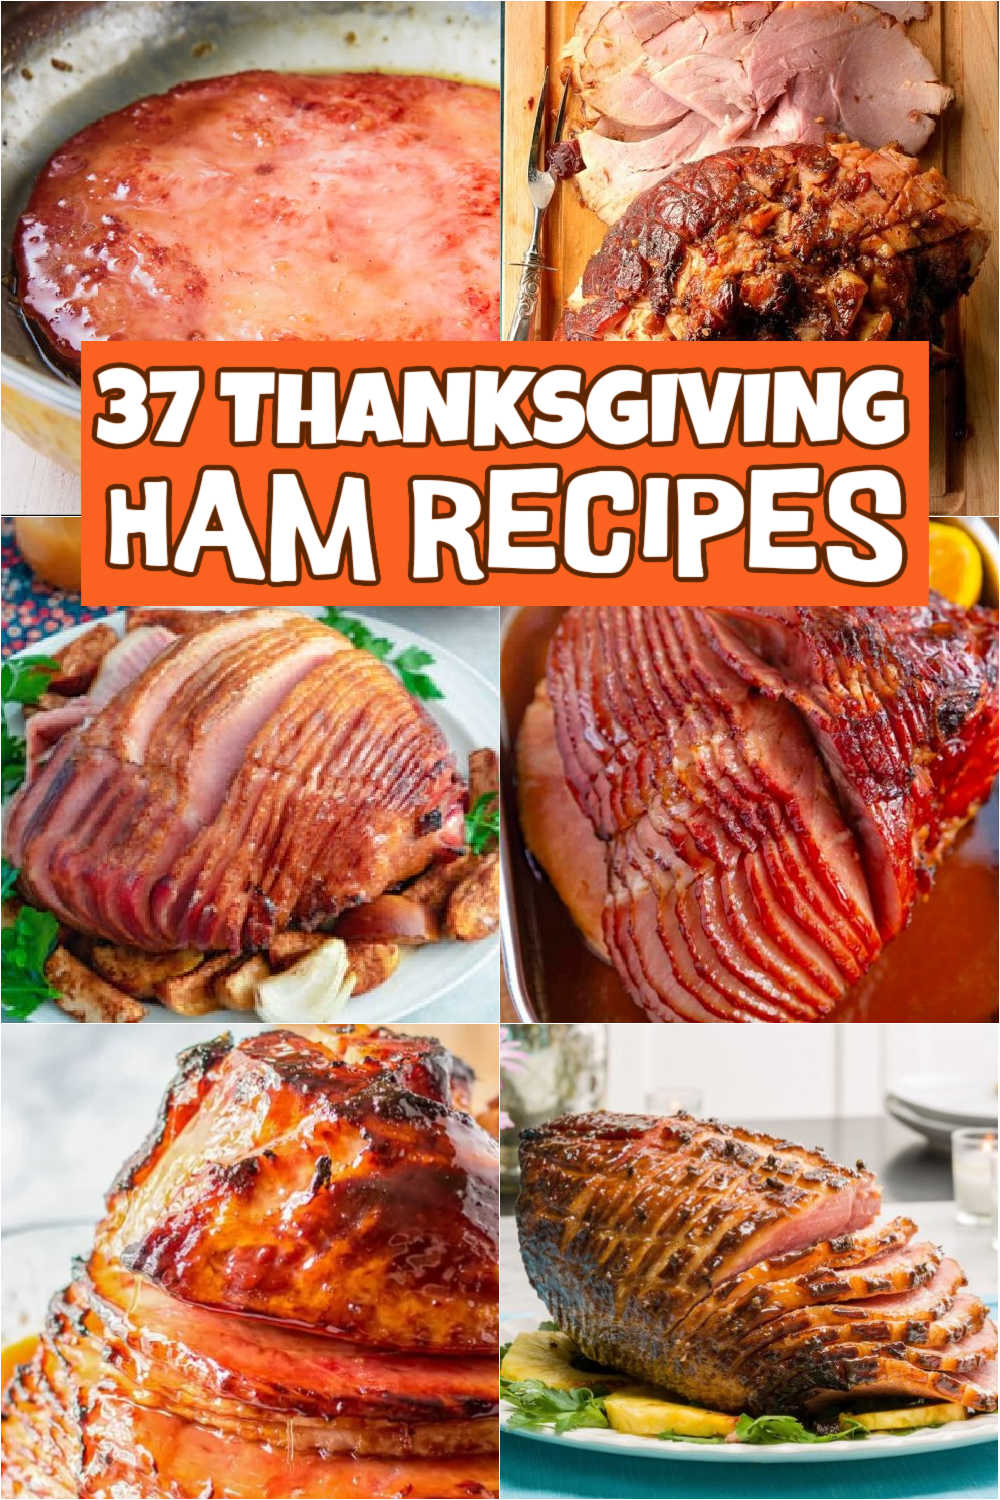 Go all out this November with 37 of our best Thanksgiving ham recipes! Serve your loved ones a Thanksgiving dinner they’ll forever be thankful for. Relish in an assortment of mouth watering dishes! #eatingonadime #thanksgivinghamrecipes #hamrecipes